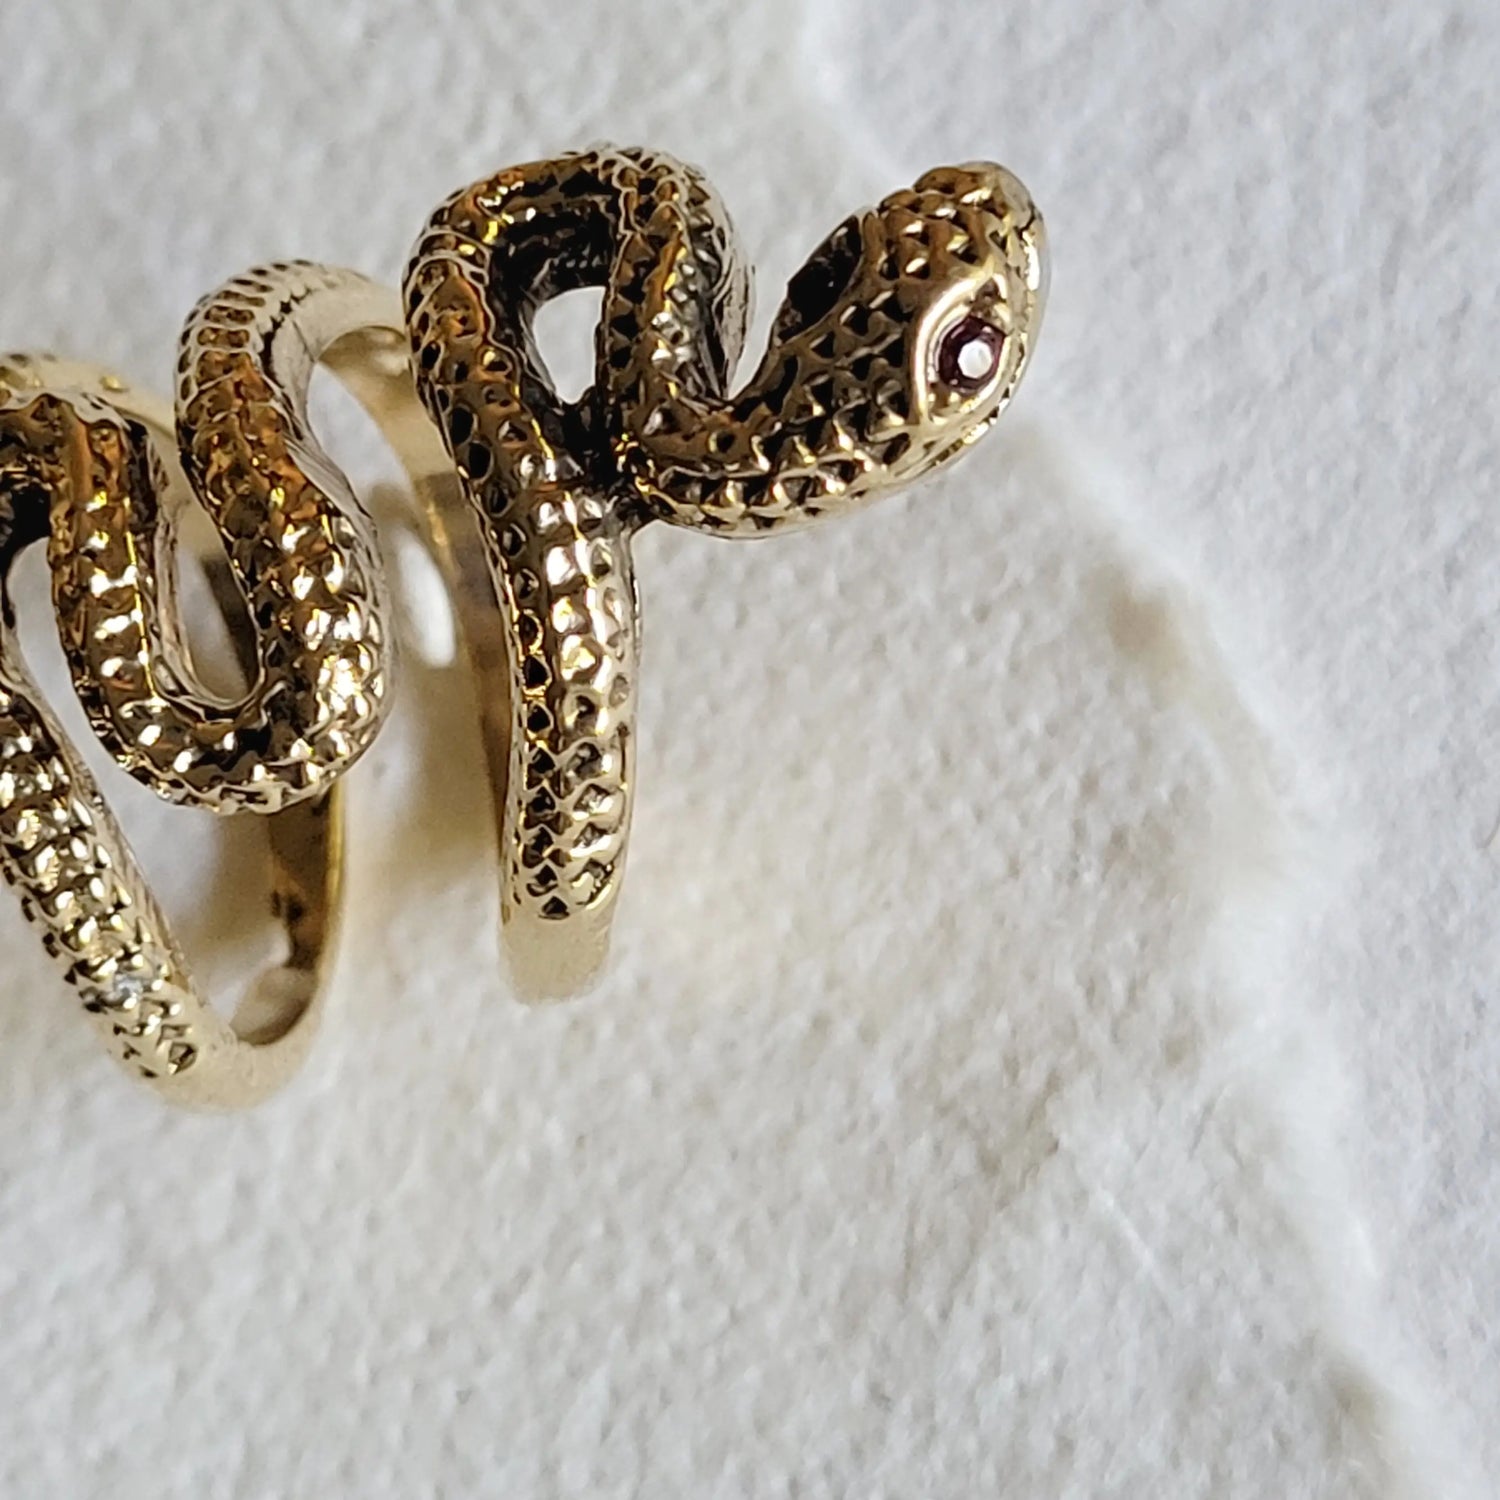 Brass Snake Ring Adjustable - Moon Room Shop and Wellness